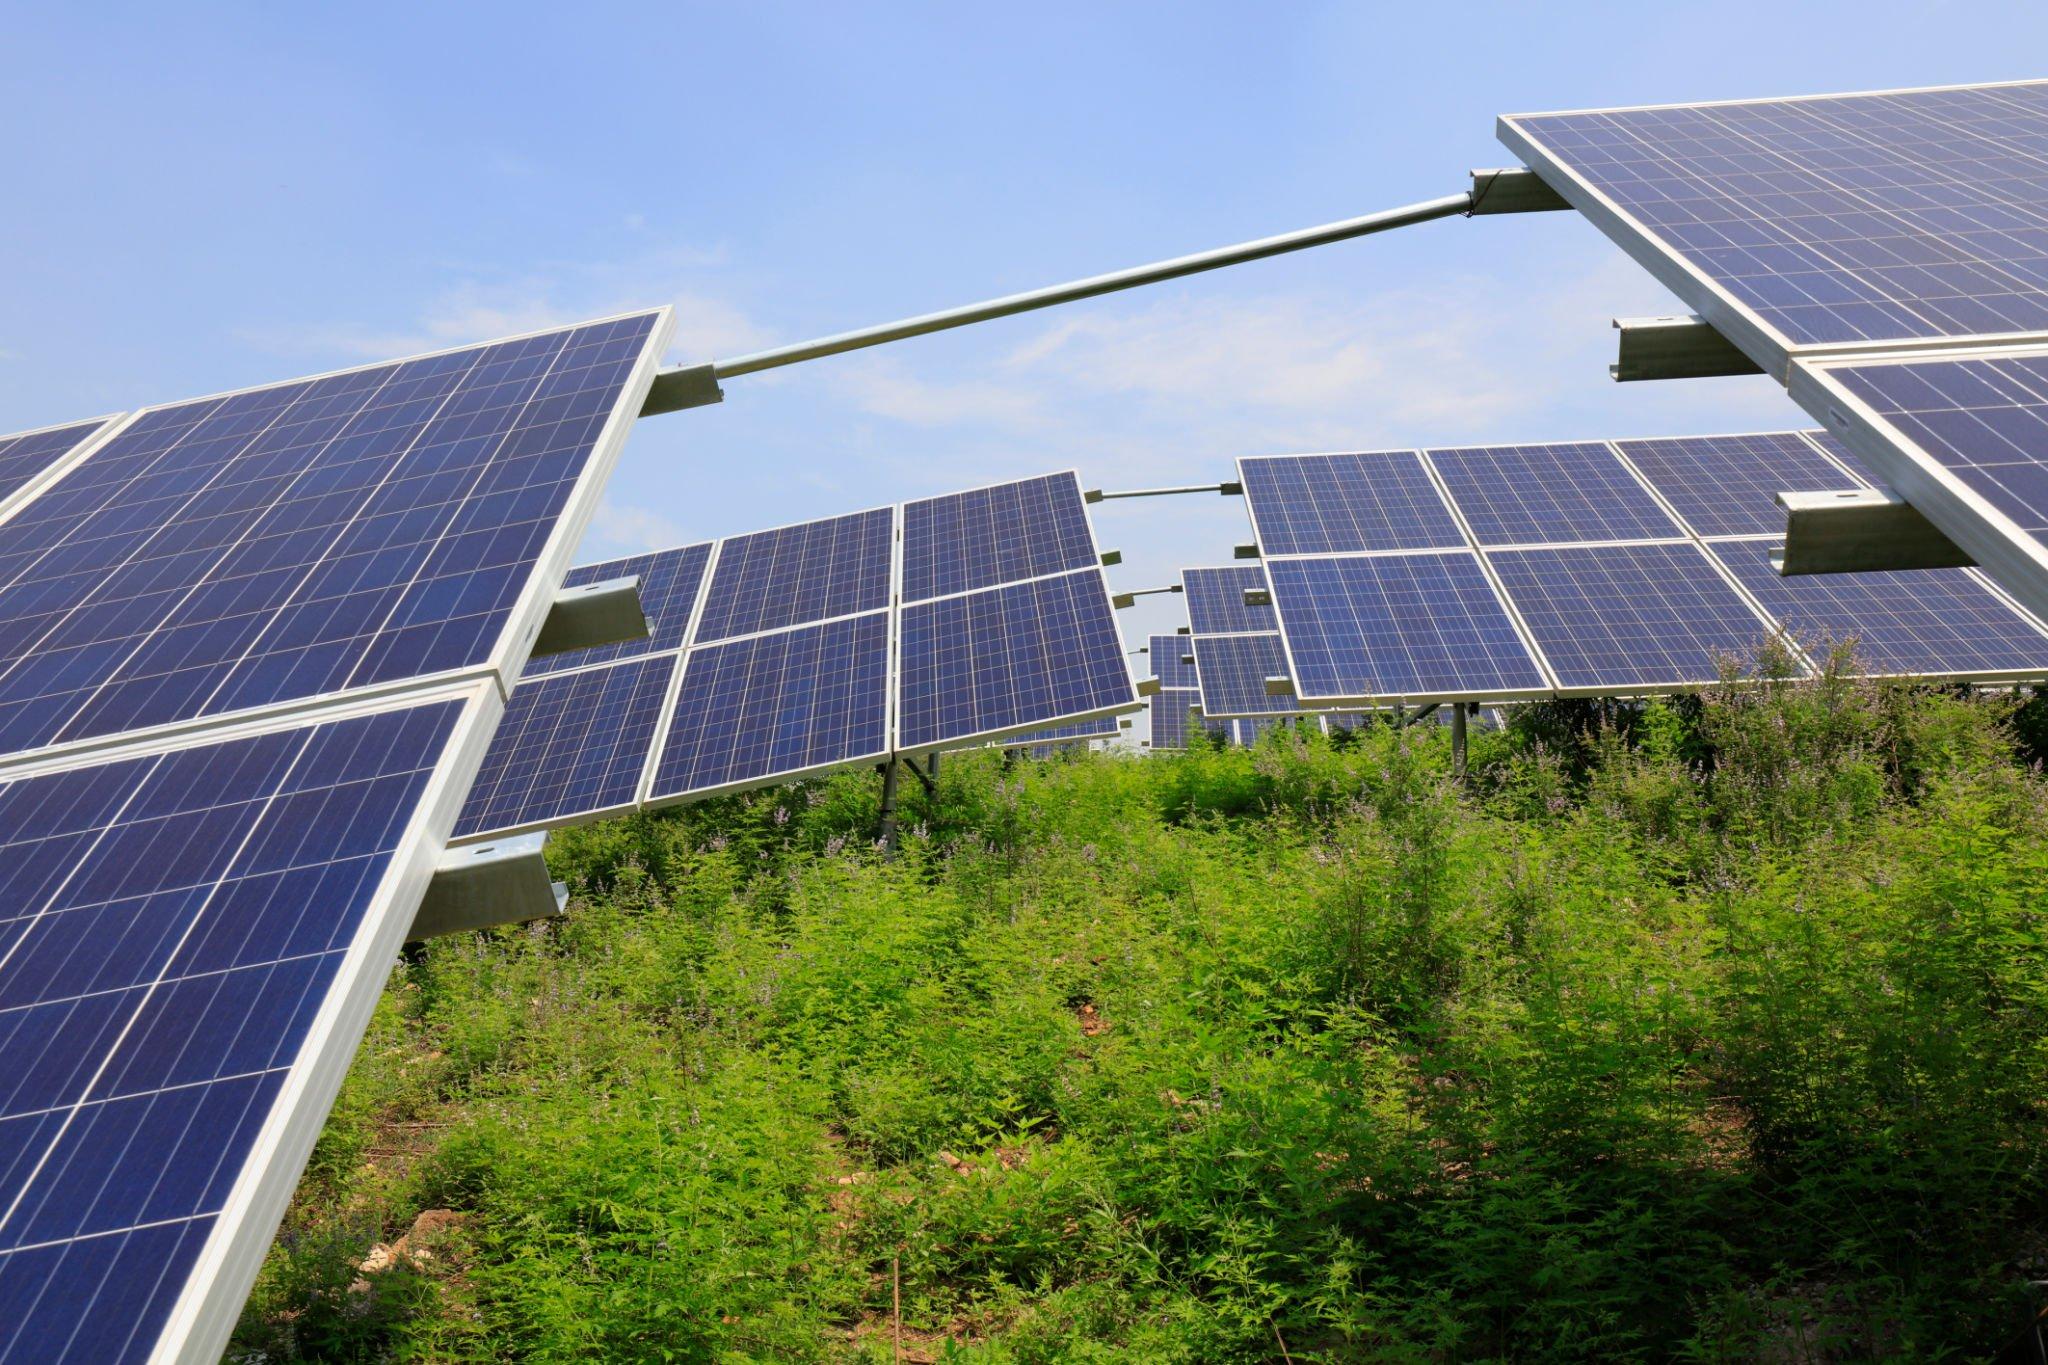 Separating Fact from Fiction: Dispelling Falsehoods About Solar Power